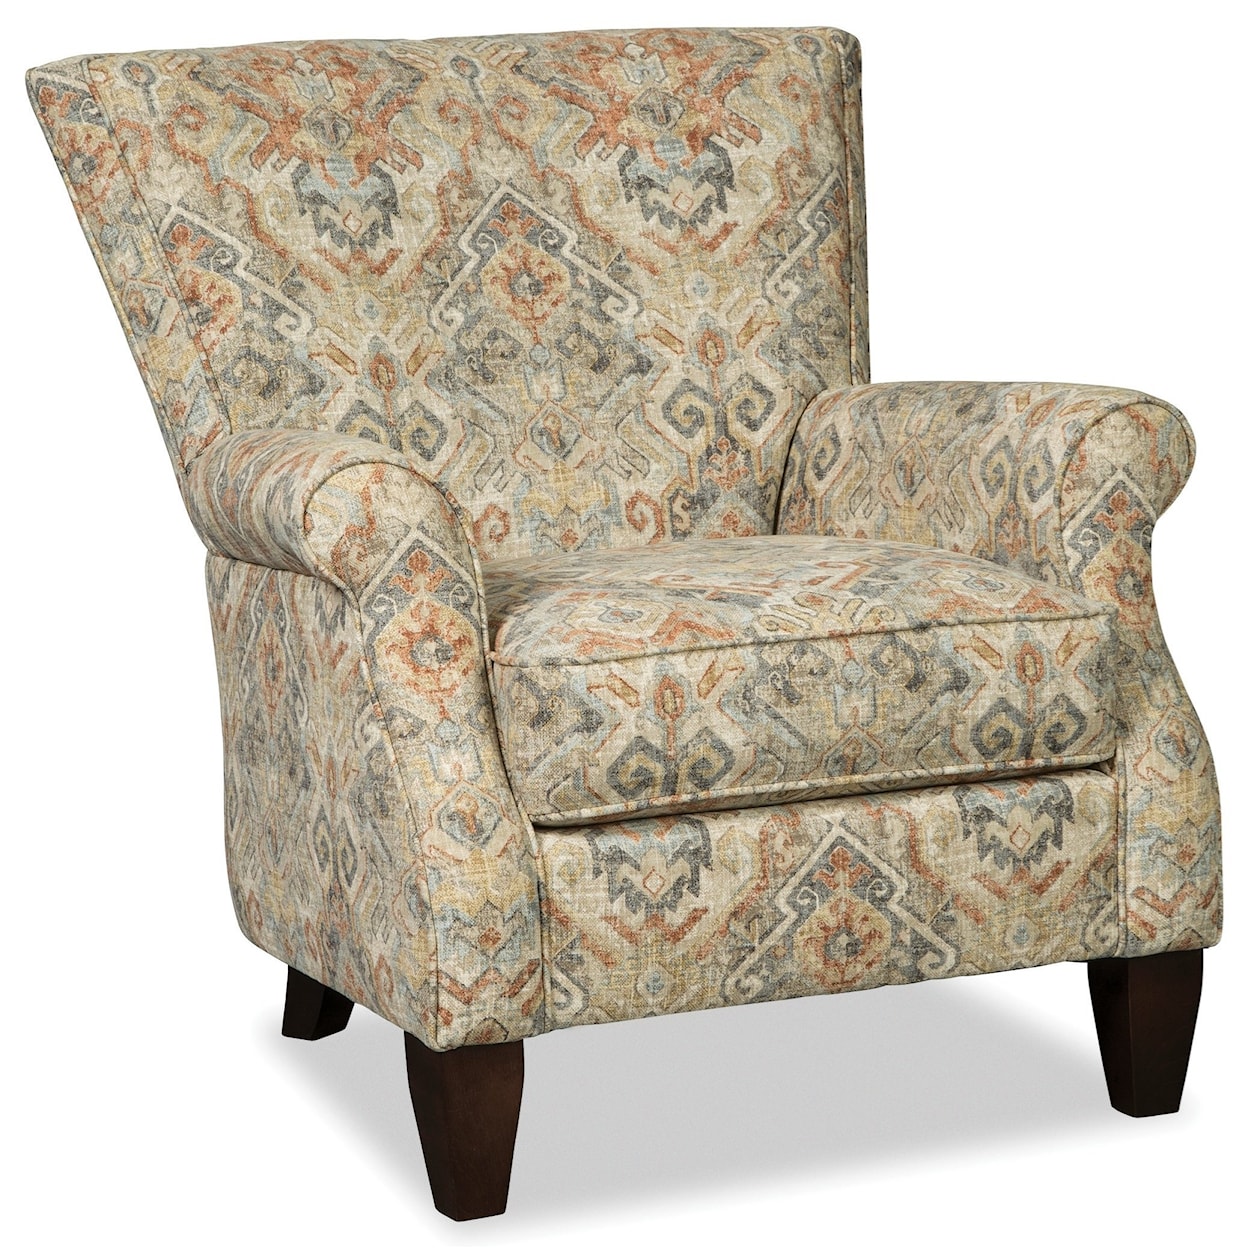 Hickory Craft 061310 Upholstered Arm Chair